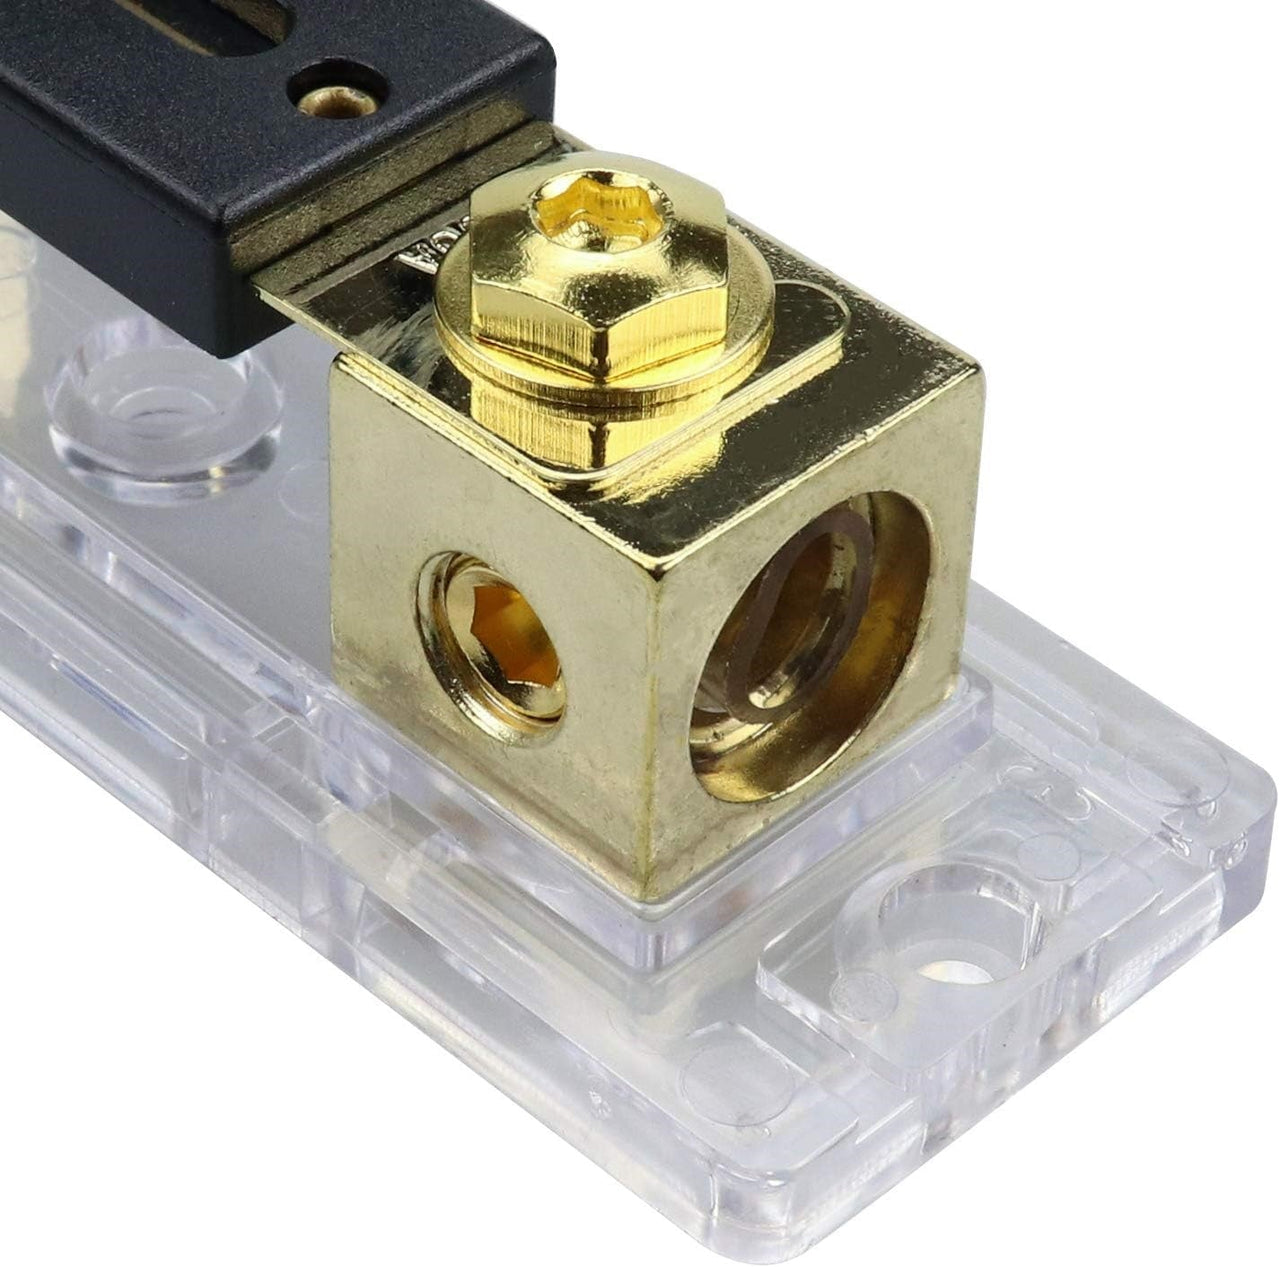 2 Absolute ANH-3 0/2/4 Gauge AWG in-Line ANL Fuse Holder & 2 Gold Plated 100 Amp Fuse